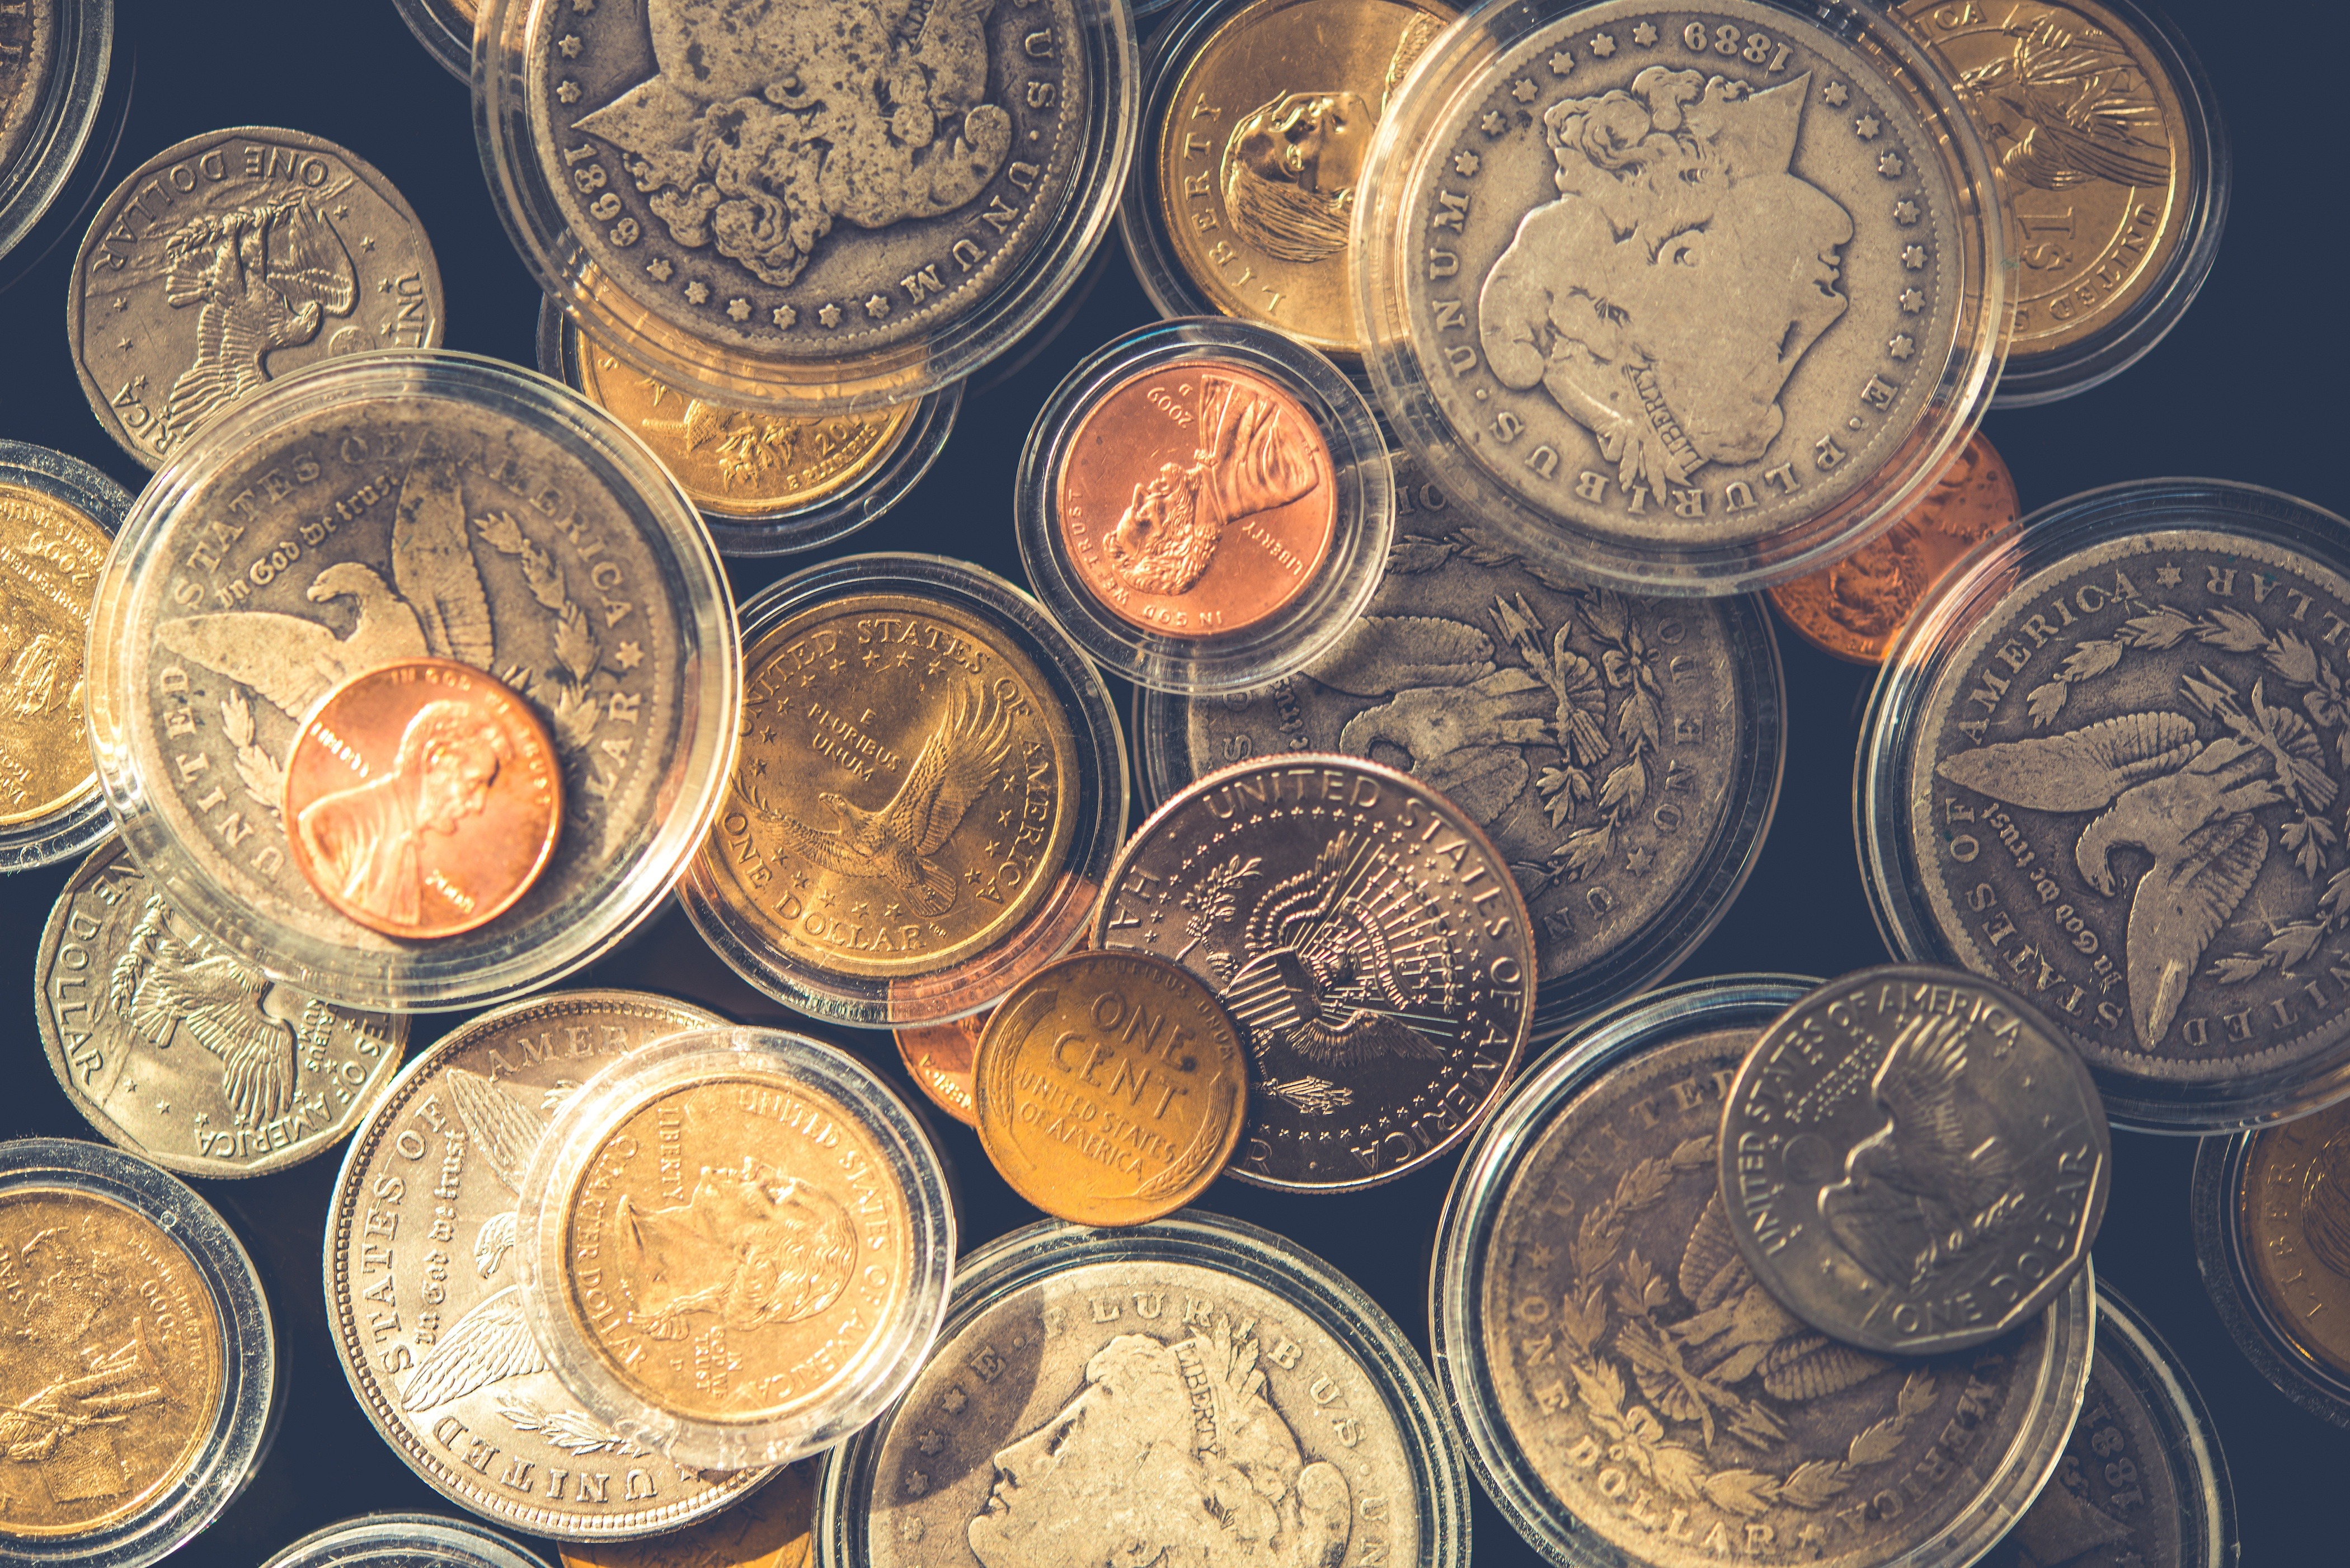 WHY COIN COLLECTING IS A FAVORITE PAST TIME